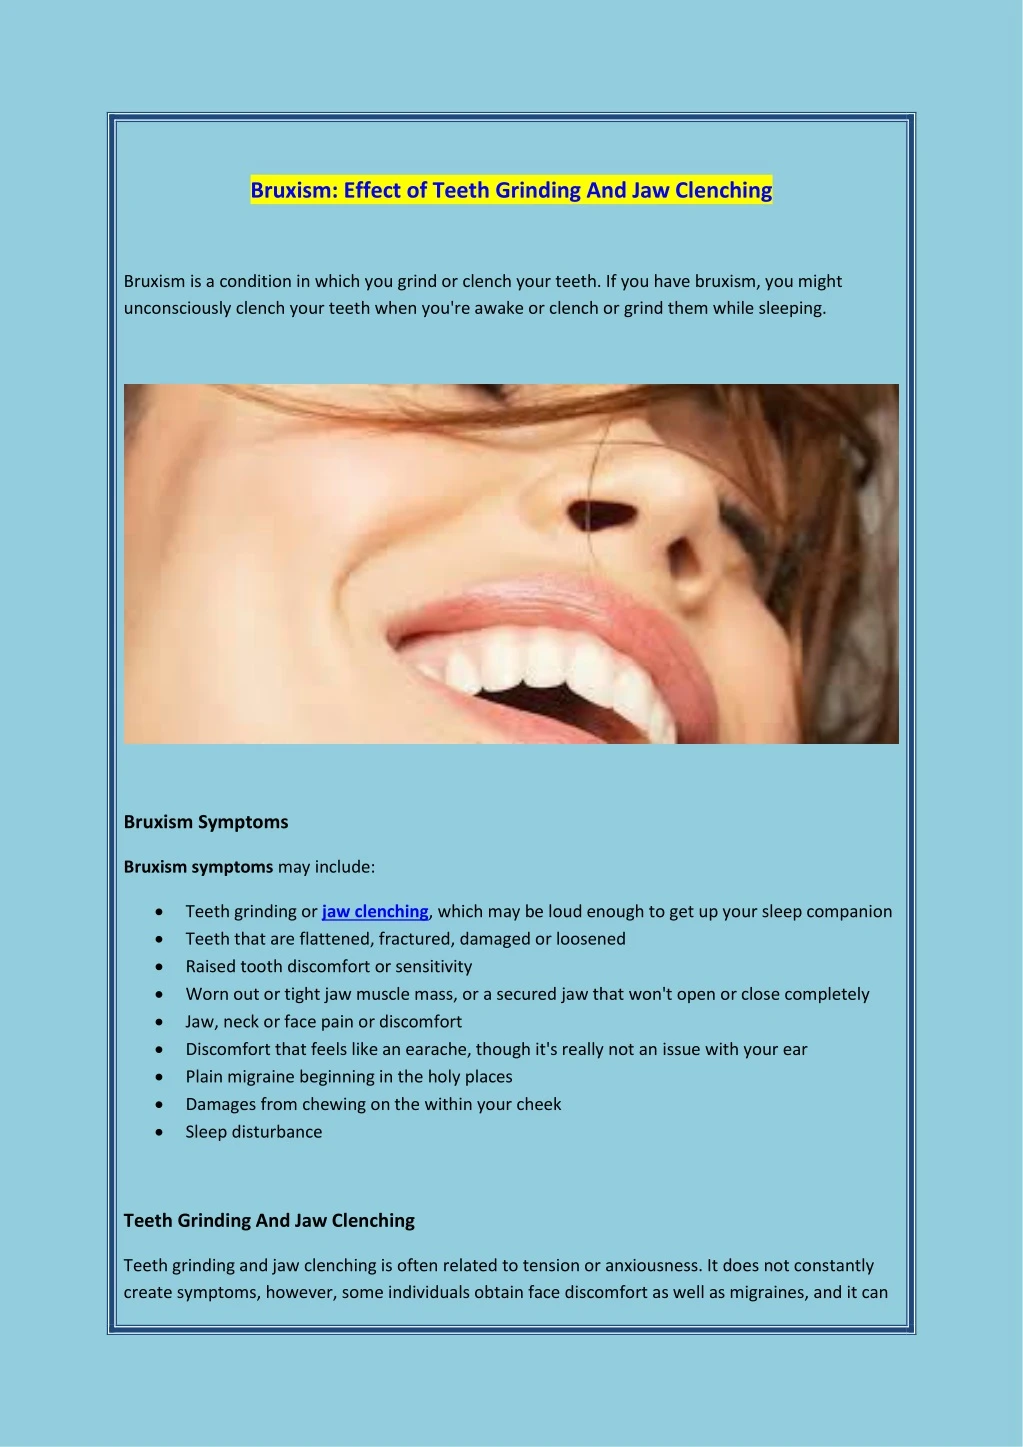 bruxism effect of teeth grinding and jaw clenching